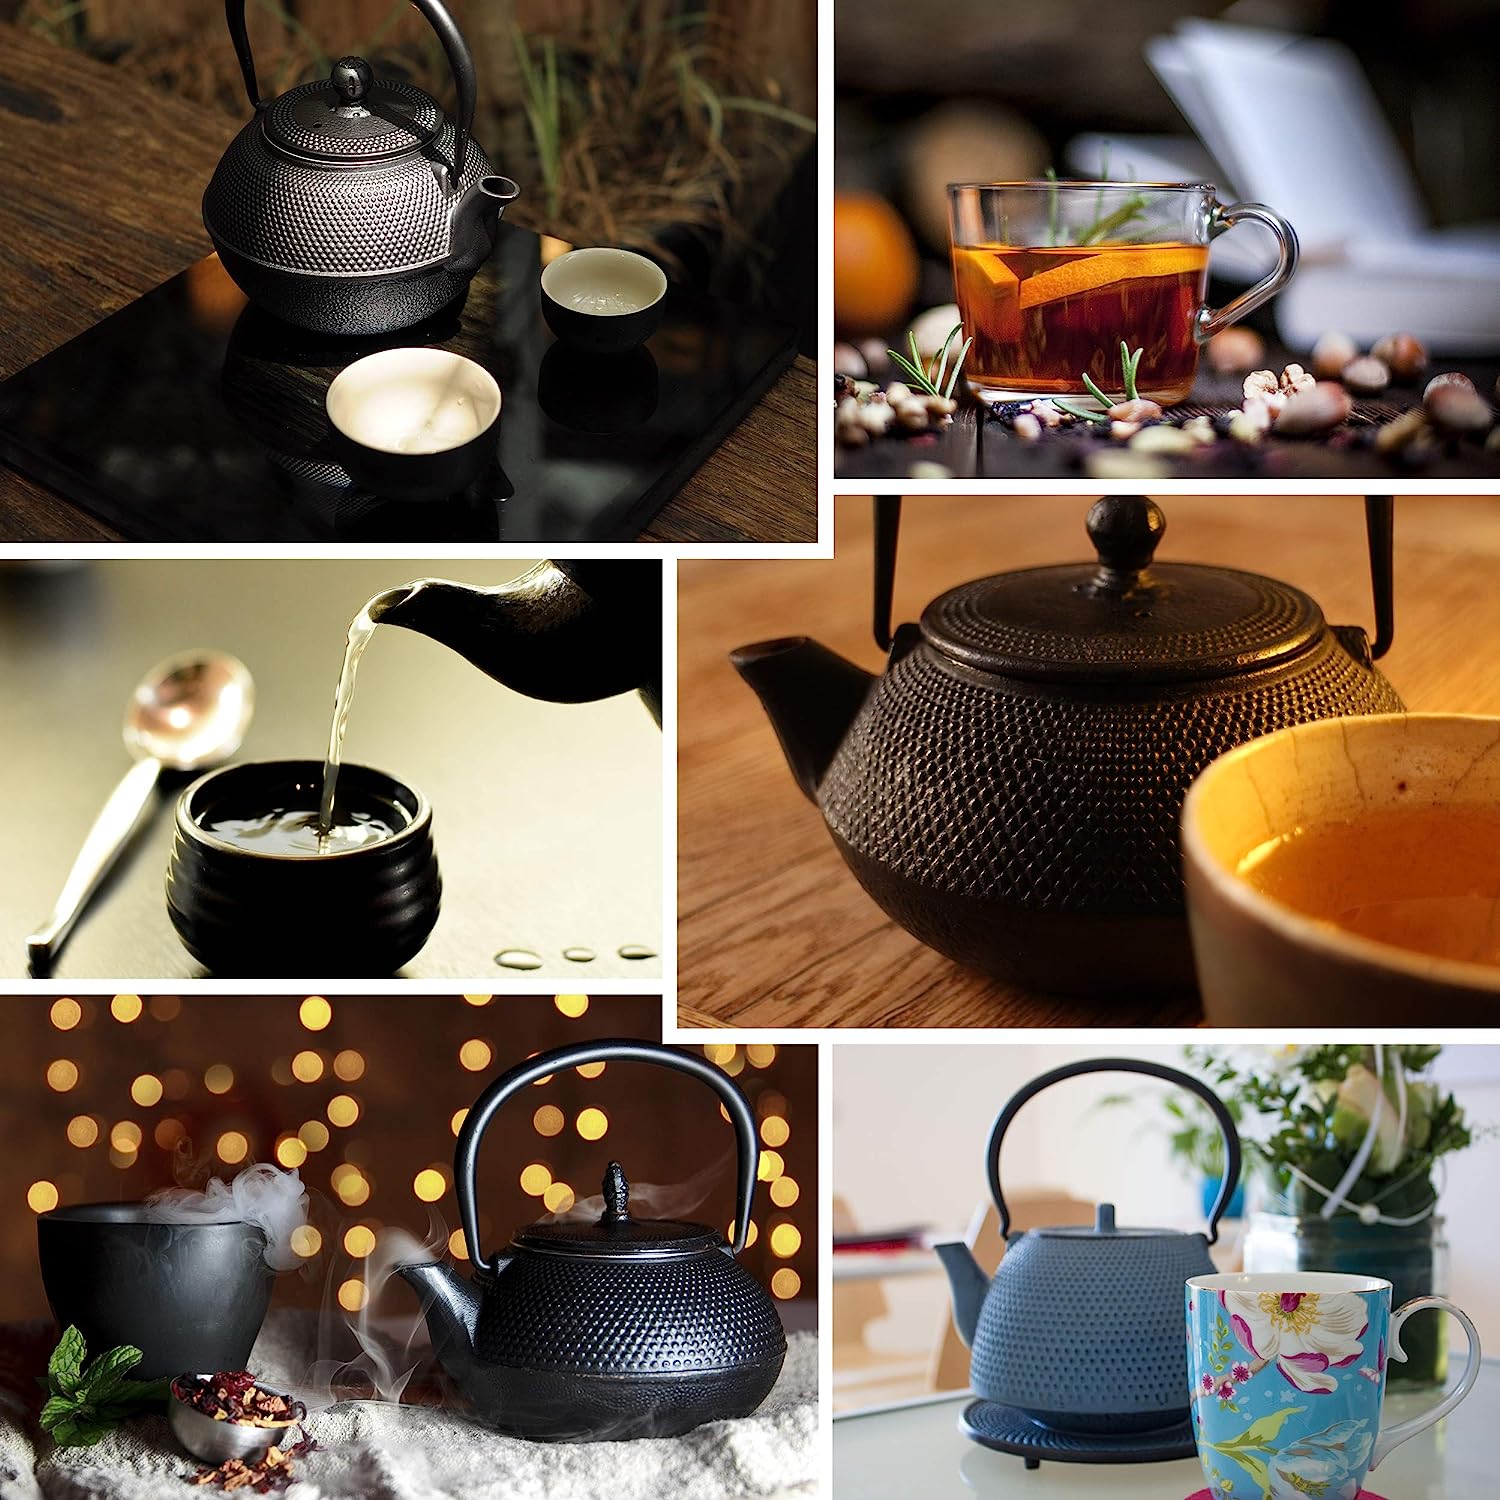 Teeblume Cast Iron Teapot Arare Set Cast Iron Teapot with Sieve Includes Saucer, 2 Cups & Gift Box Matching Inside Fully Enamelled Choice of Colours, 900 ml